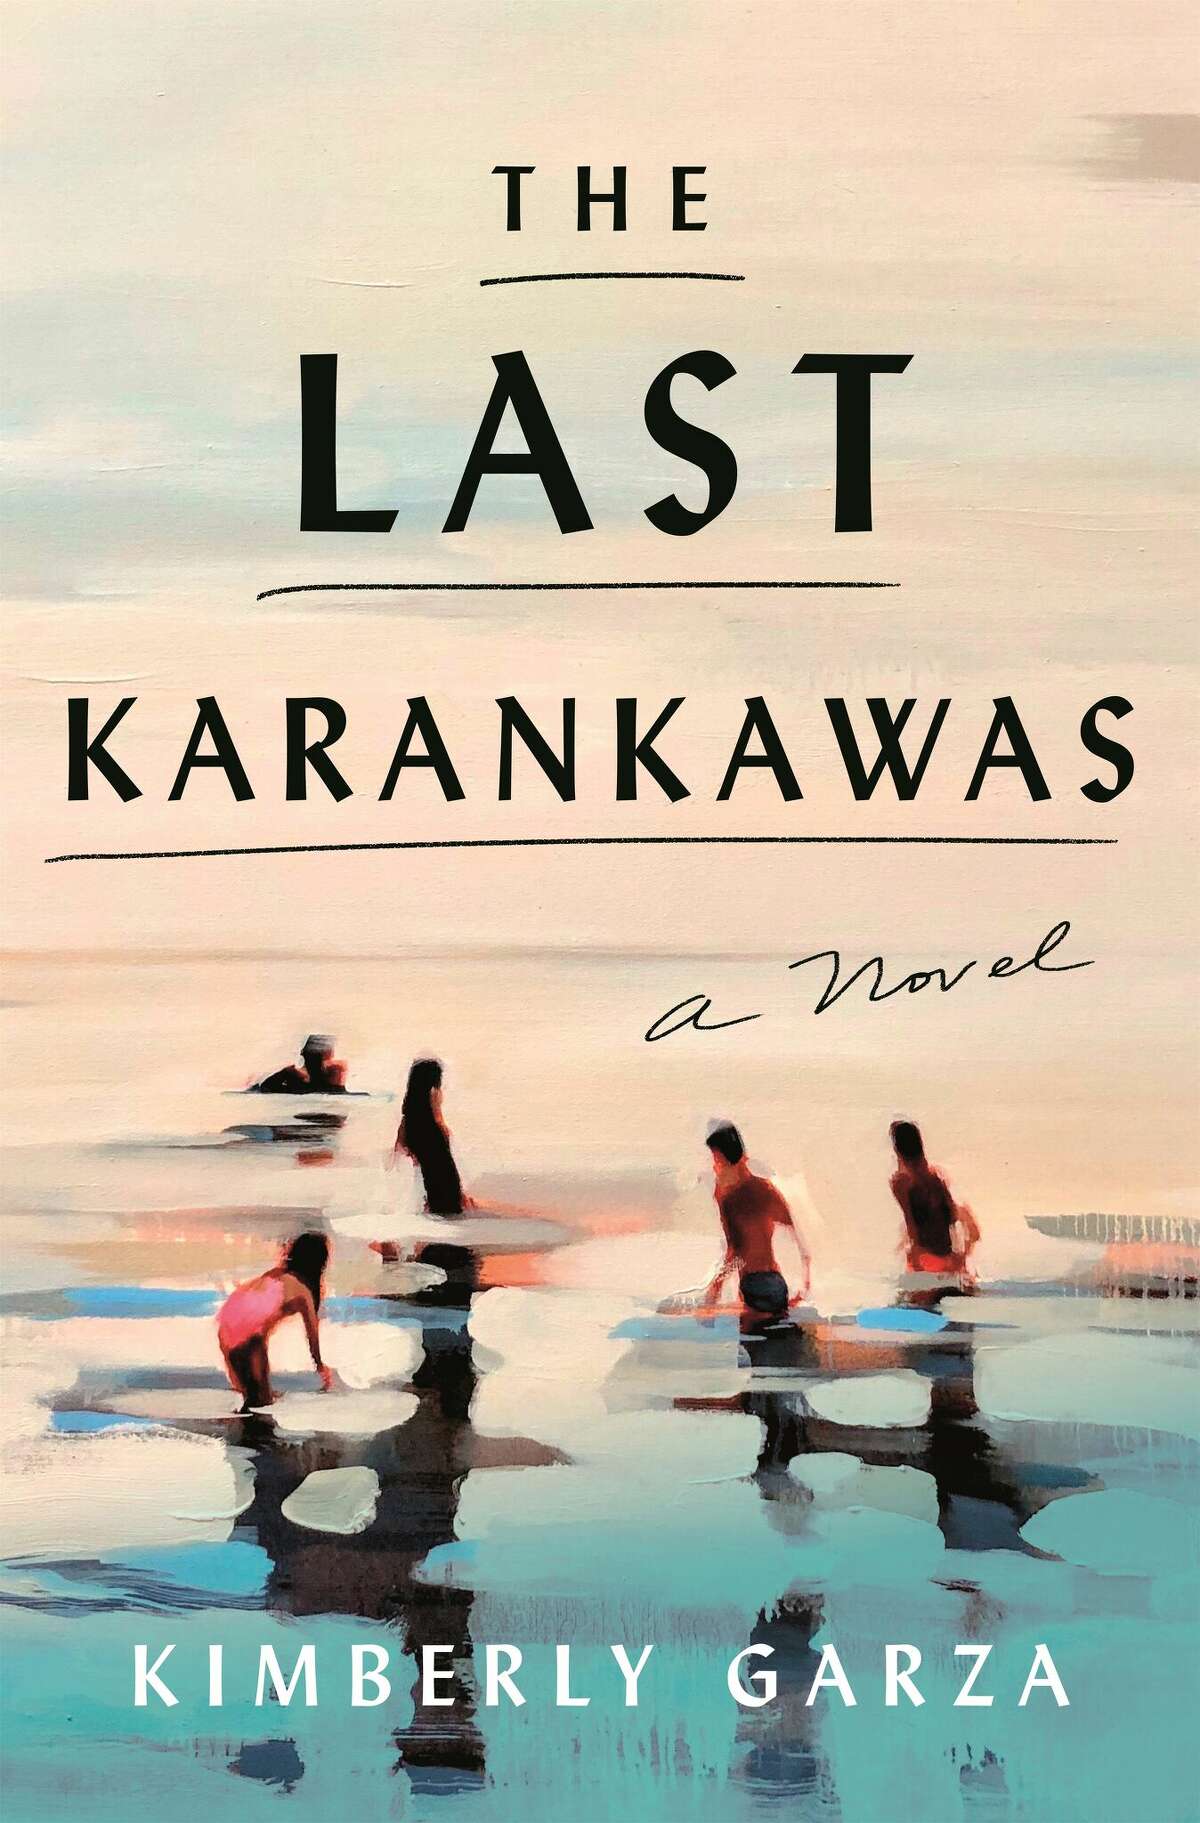 Kimberly Garza's short story grew into The Last Karankawas, her first novel published last August.